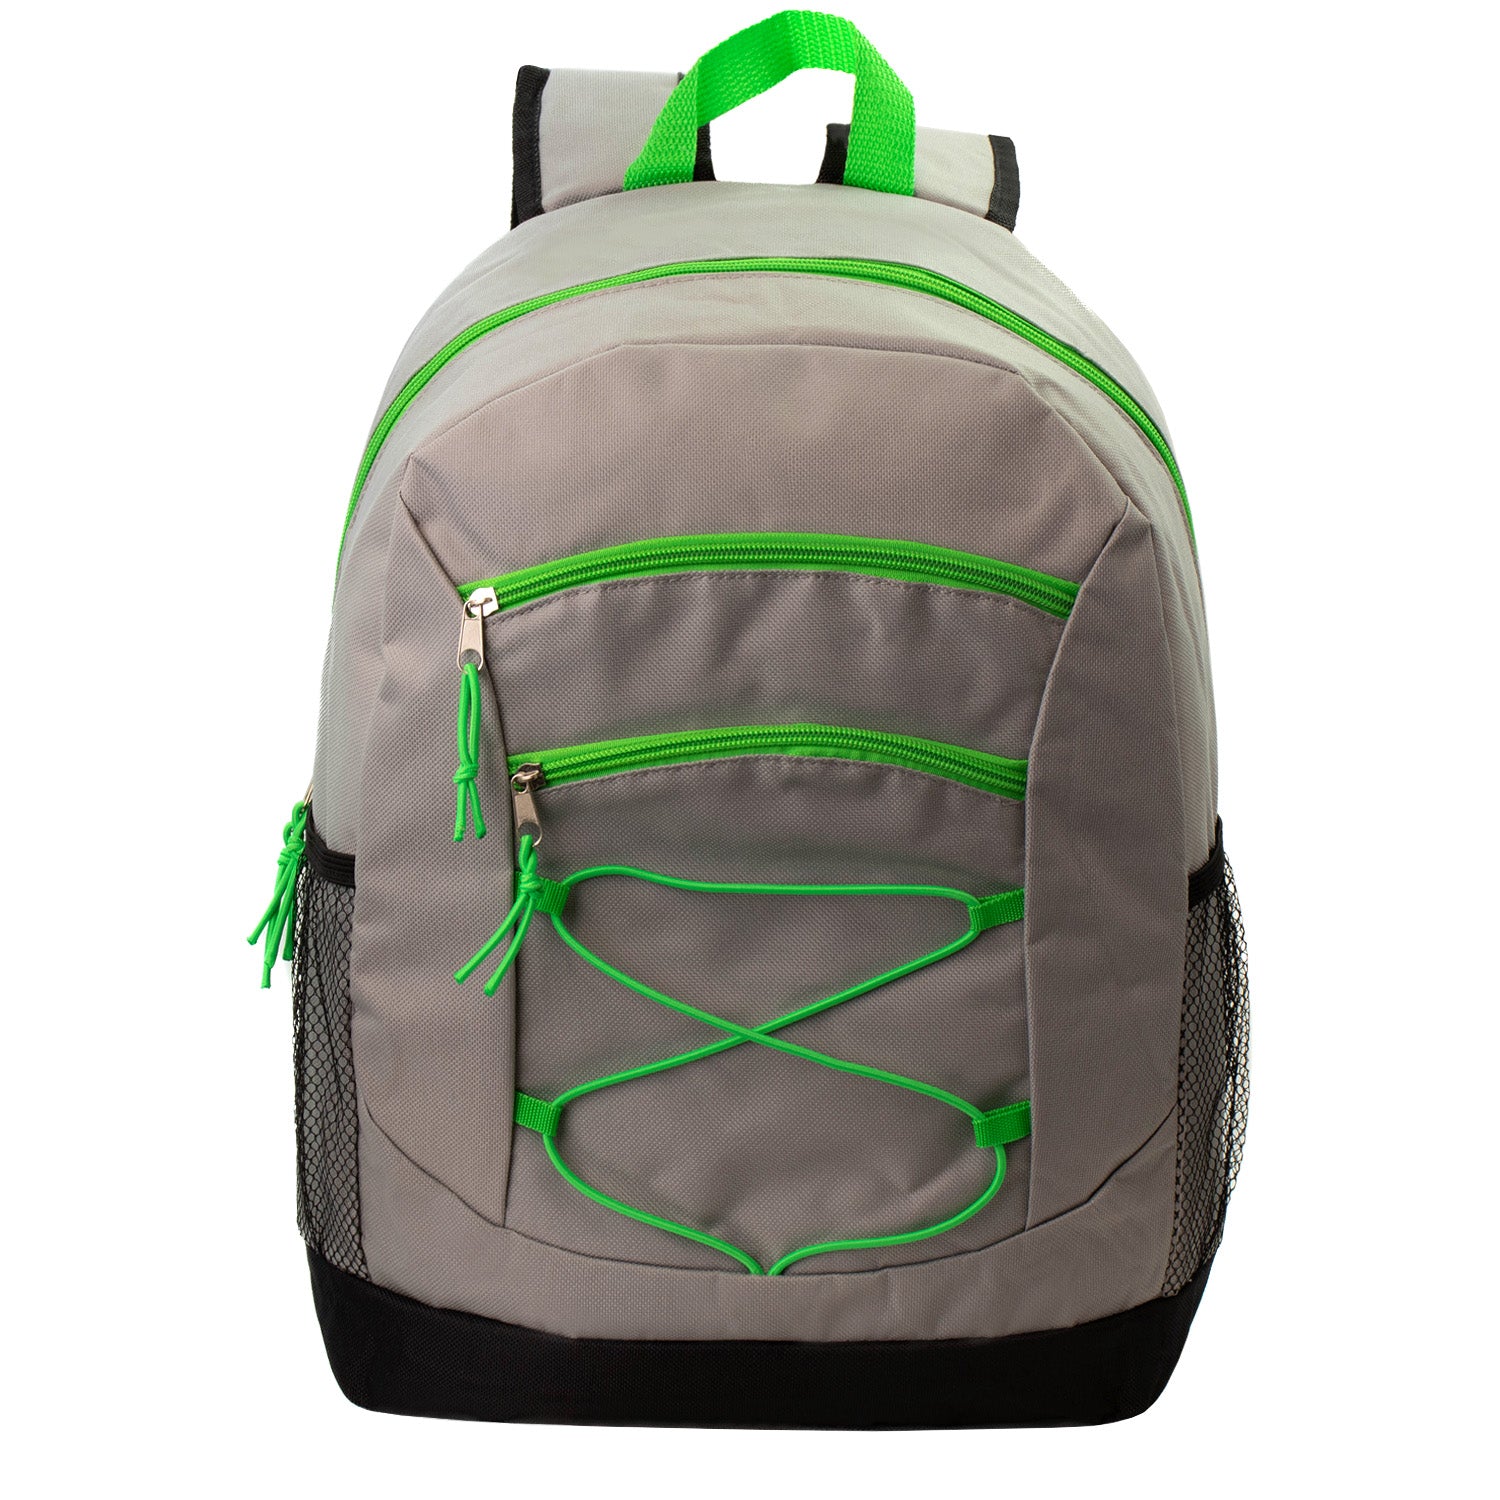 17" Bungee Wholesale Backpack in Assorted Colors - Bulk Case of 24